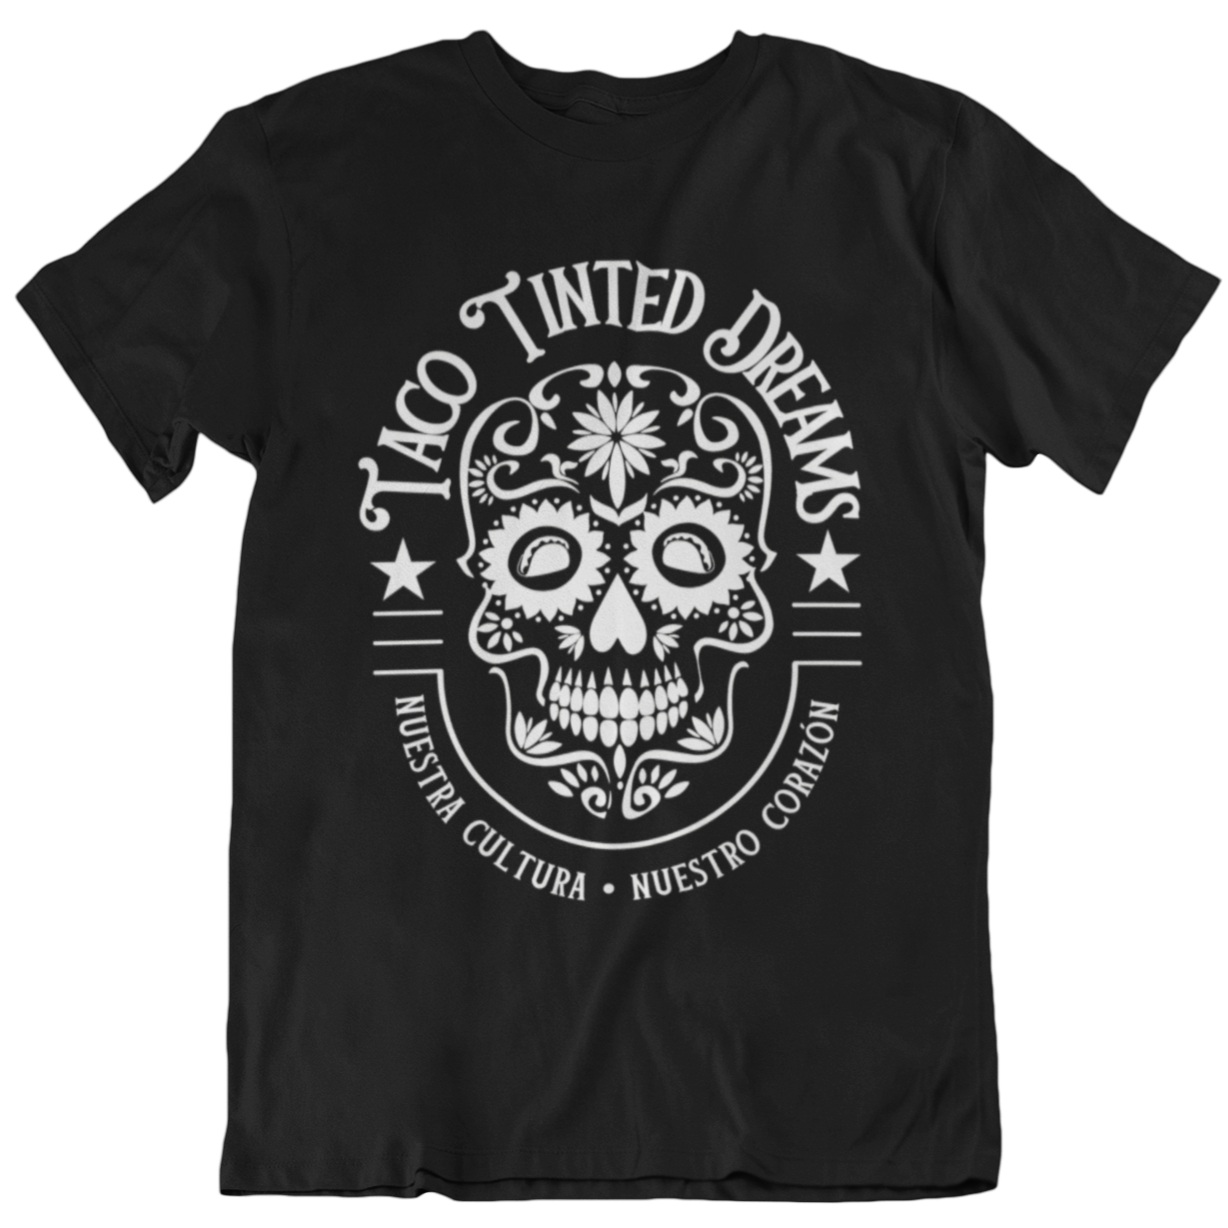 T-shirt with tattoo-style Mexican sugar skull logo and text "taco tinted dreams" and "nuestra cultura, nuestro corazon"